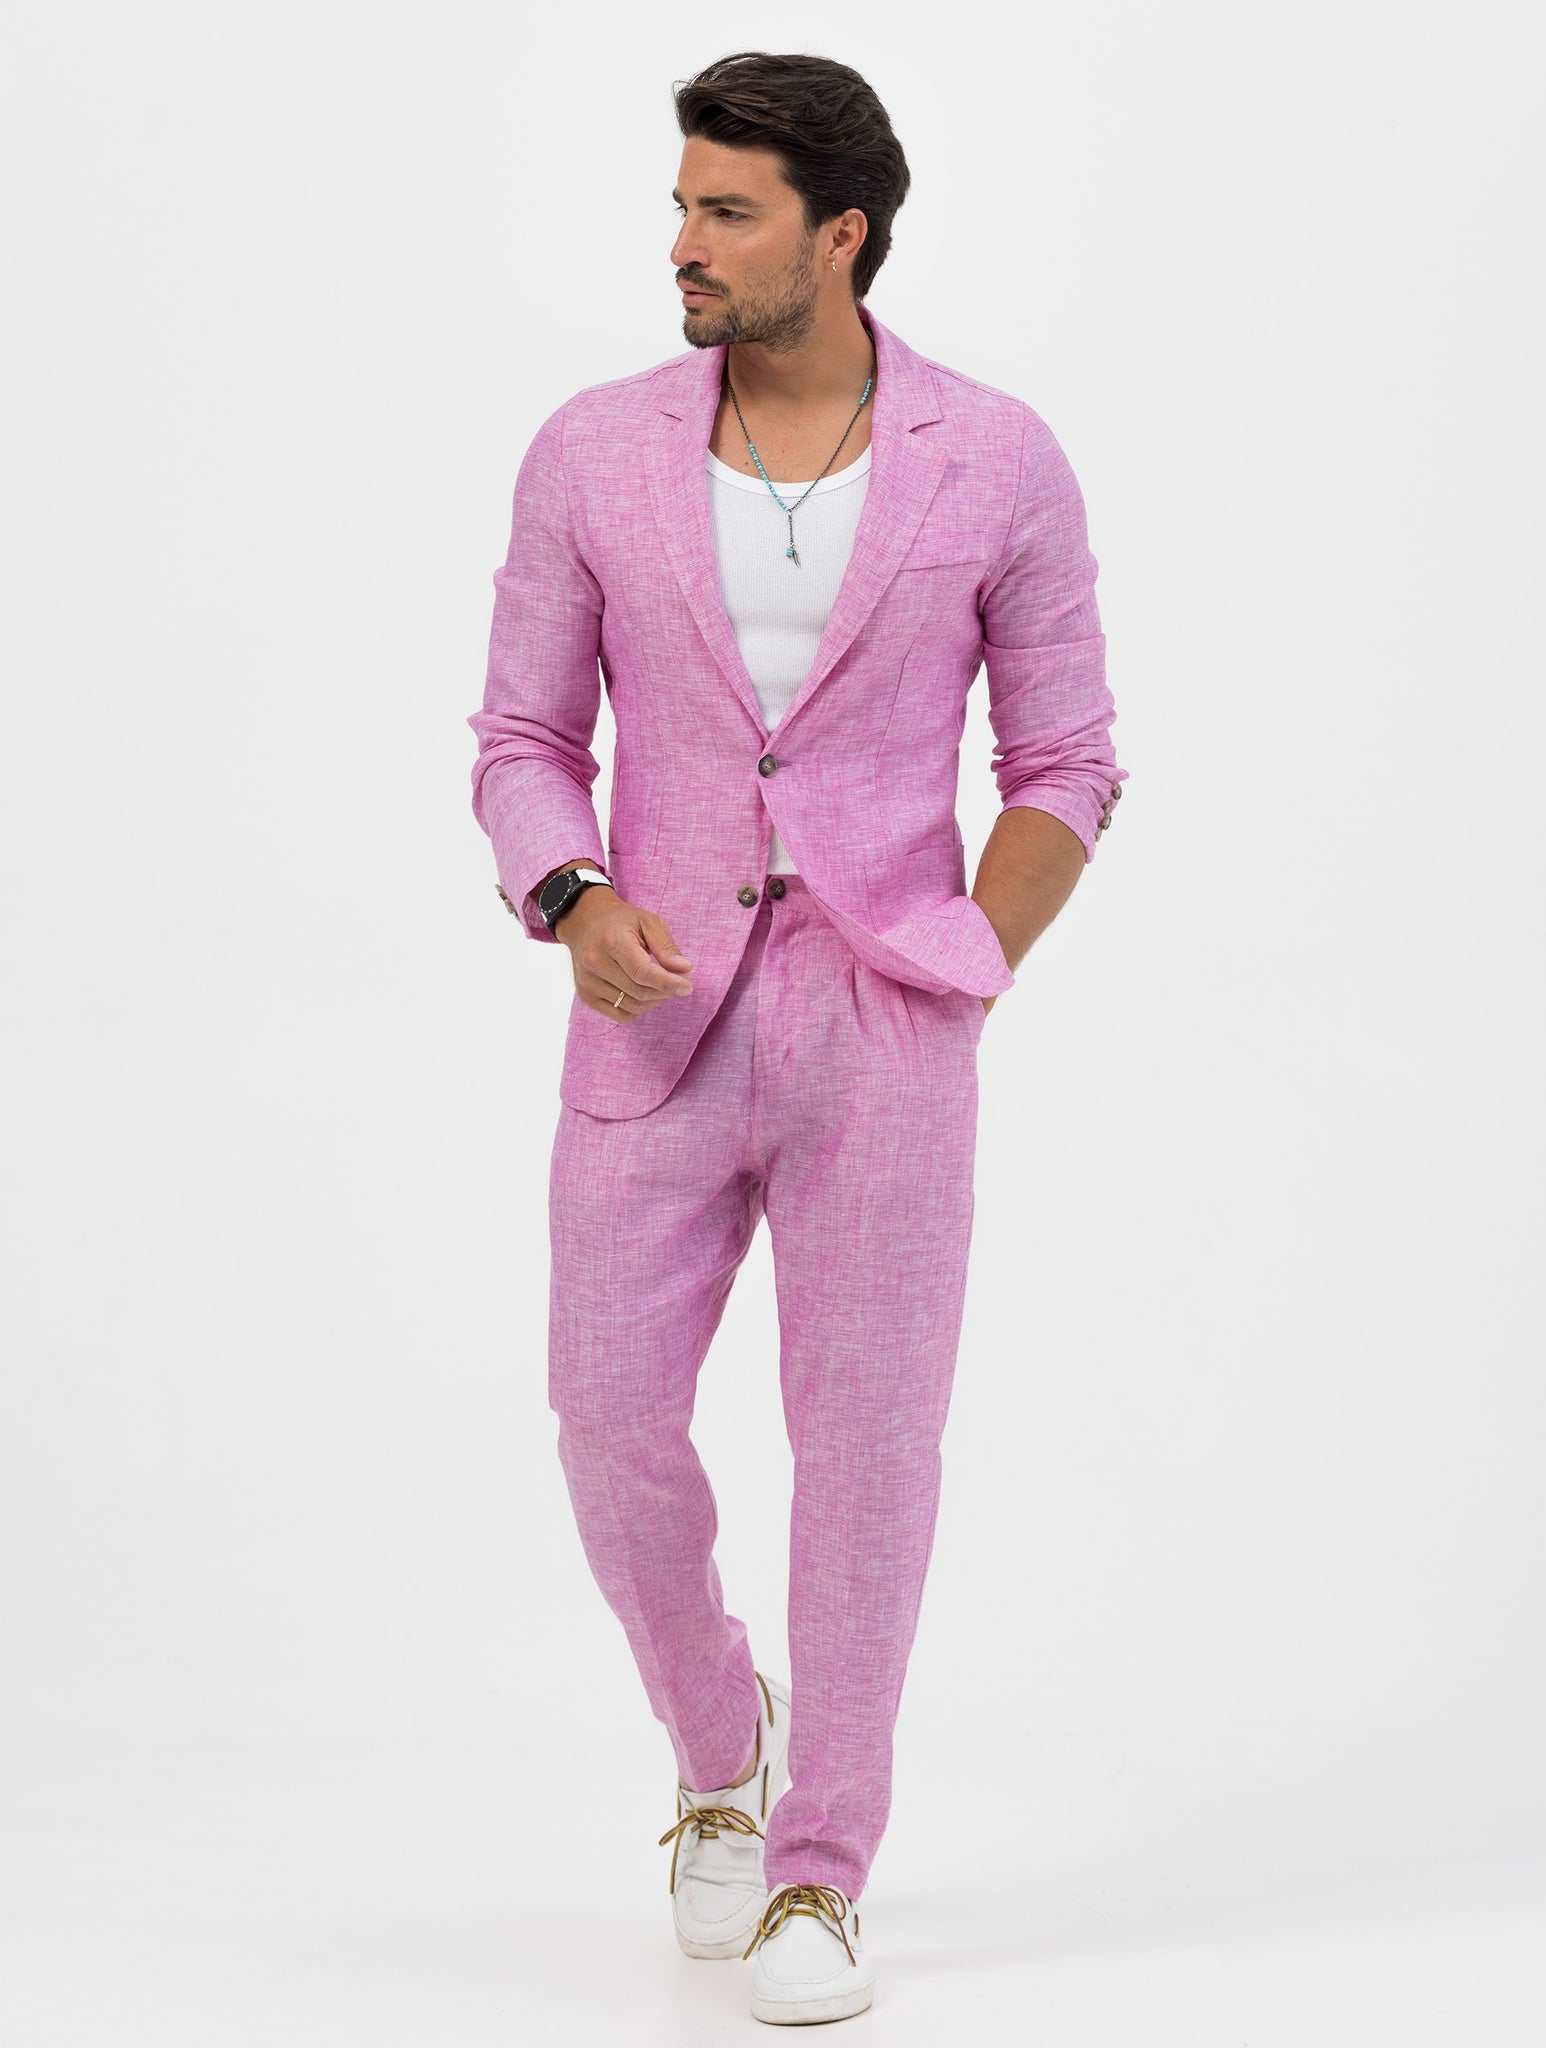 FEDRO SINGLE BREASTED SUIT IN ROSE